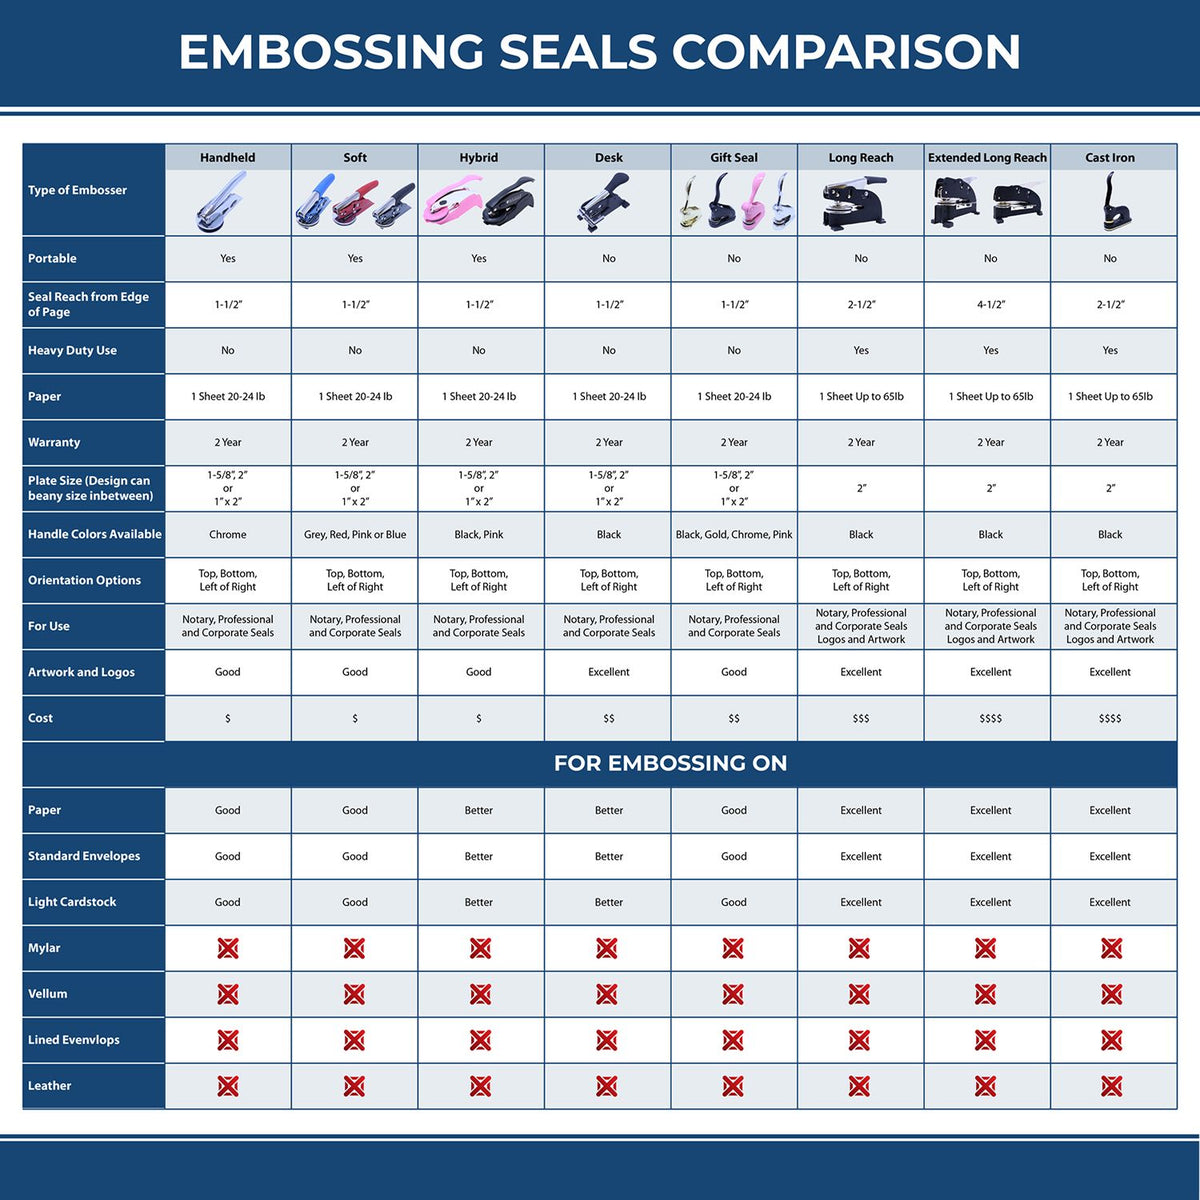 A comparison chart for the different types of mount models available for the State of New York Long Reach Architectural Embossing Seal.